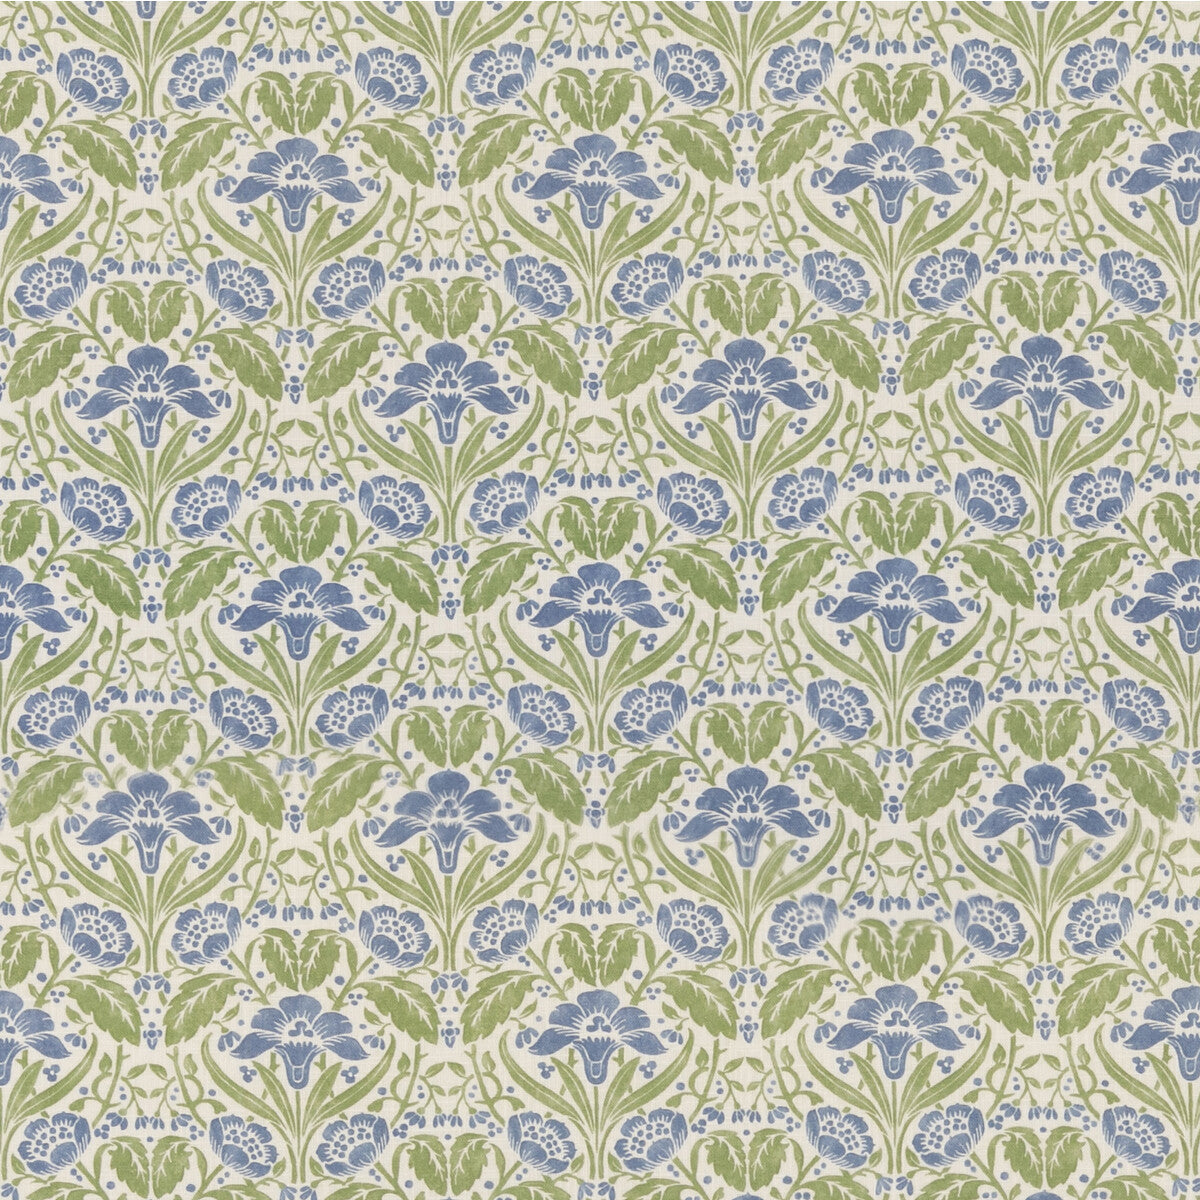 Iris Meadow fabric in blue/green color - pattern BP10979.1.0 - by G P &amp; J Baker in the Original Brantwood Fabric collection